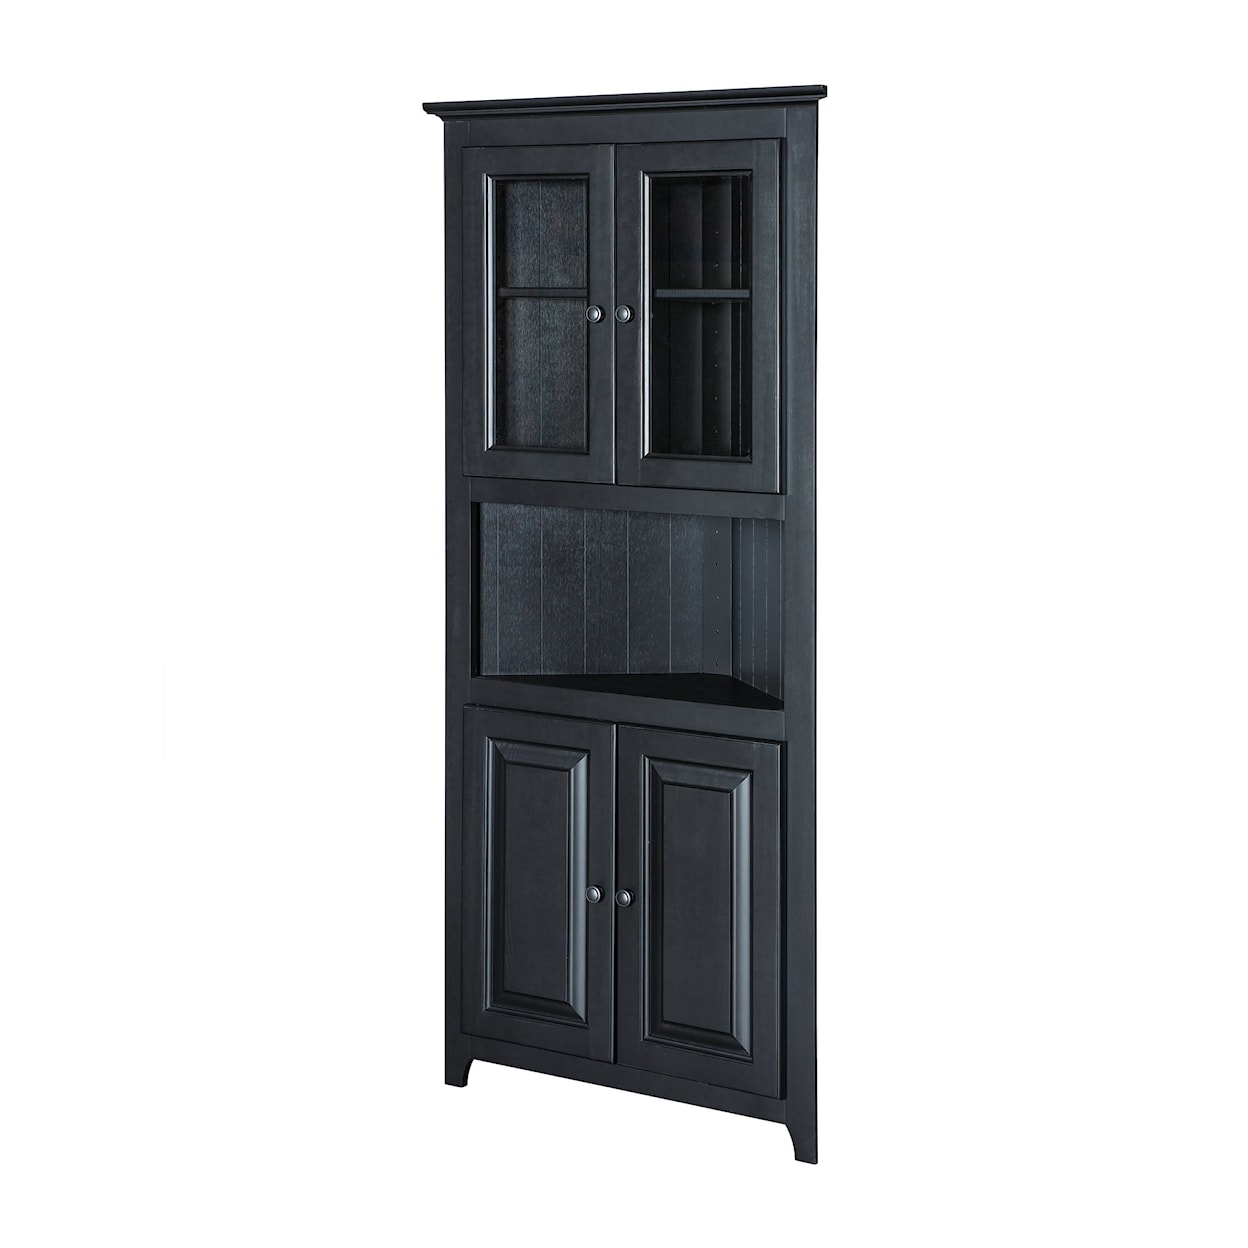 Archbold Furniture Pantries and Cabinets Corner Cabinet